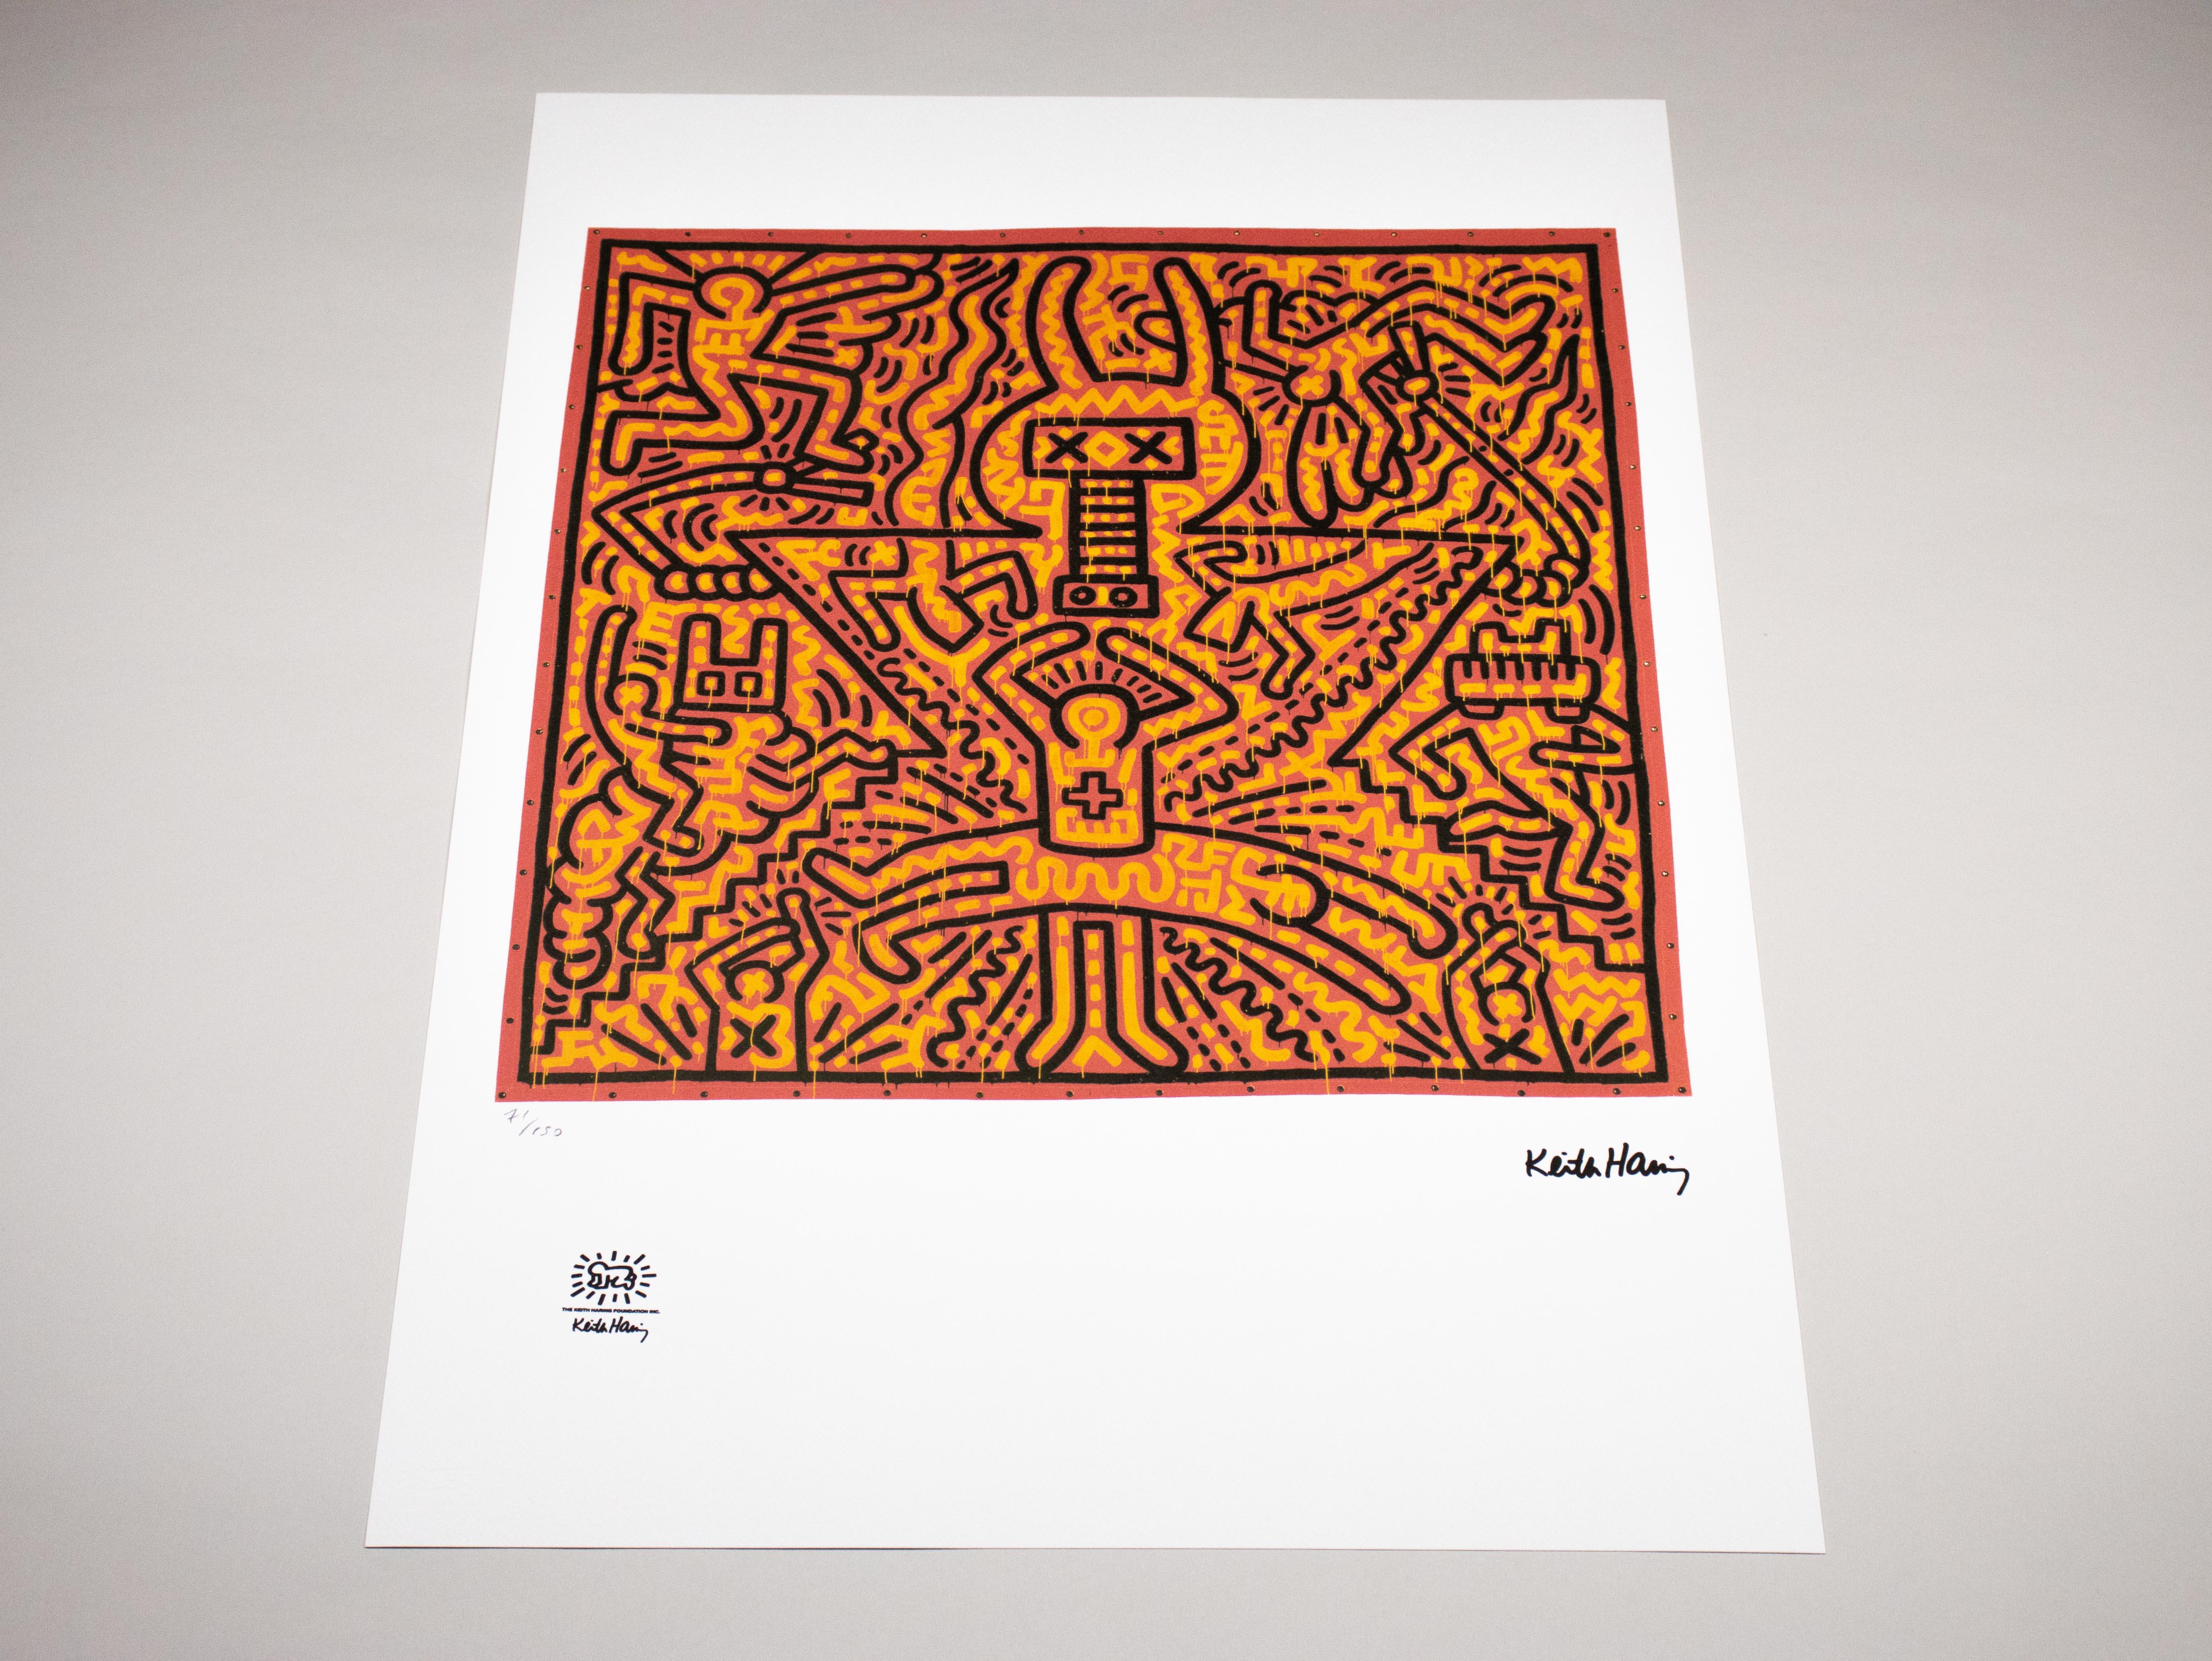 Lithograph - Limited Edition 71/150 - Keith Haring Foundation Inc. For Sale 6